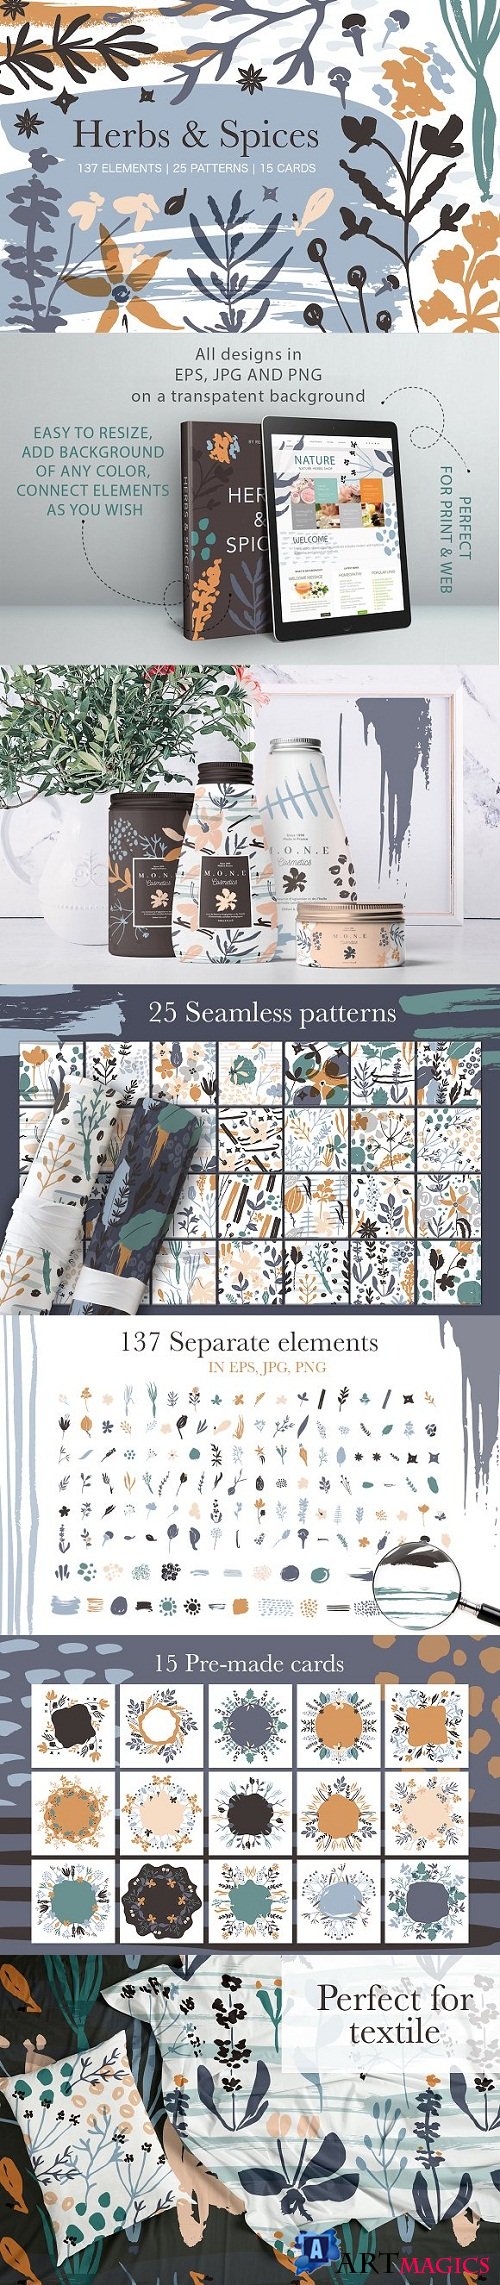 Herbs & Spices. Big graphic set - 3134863